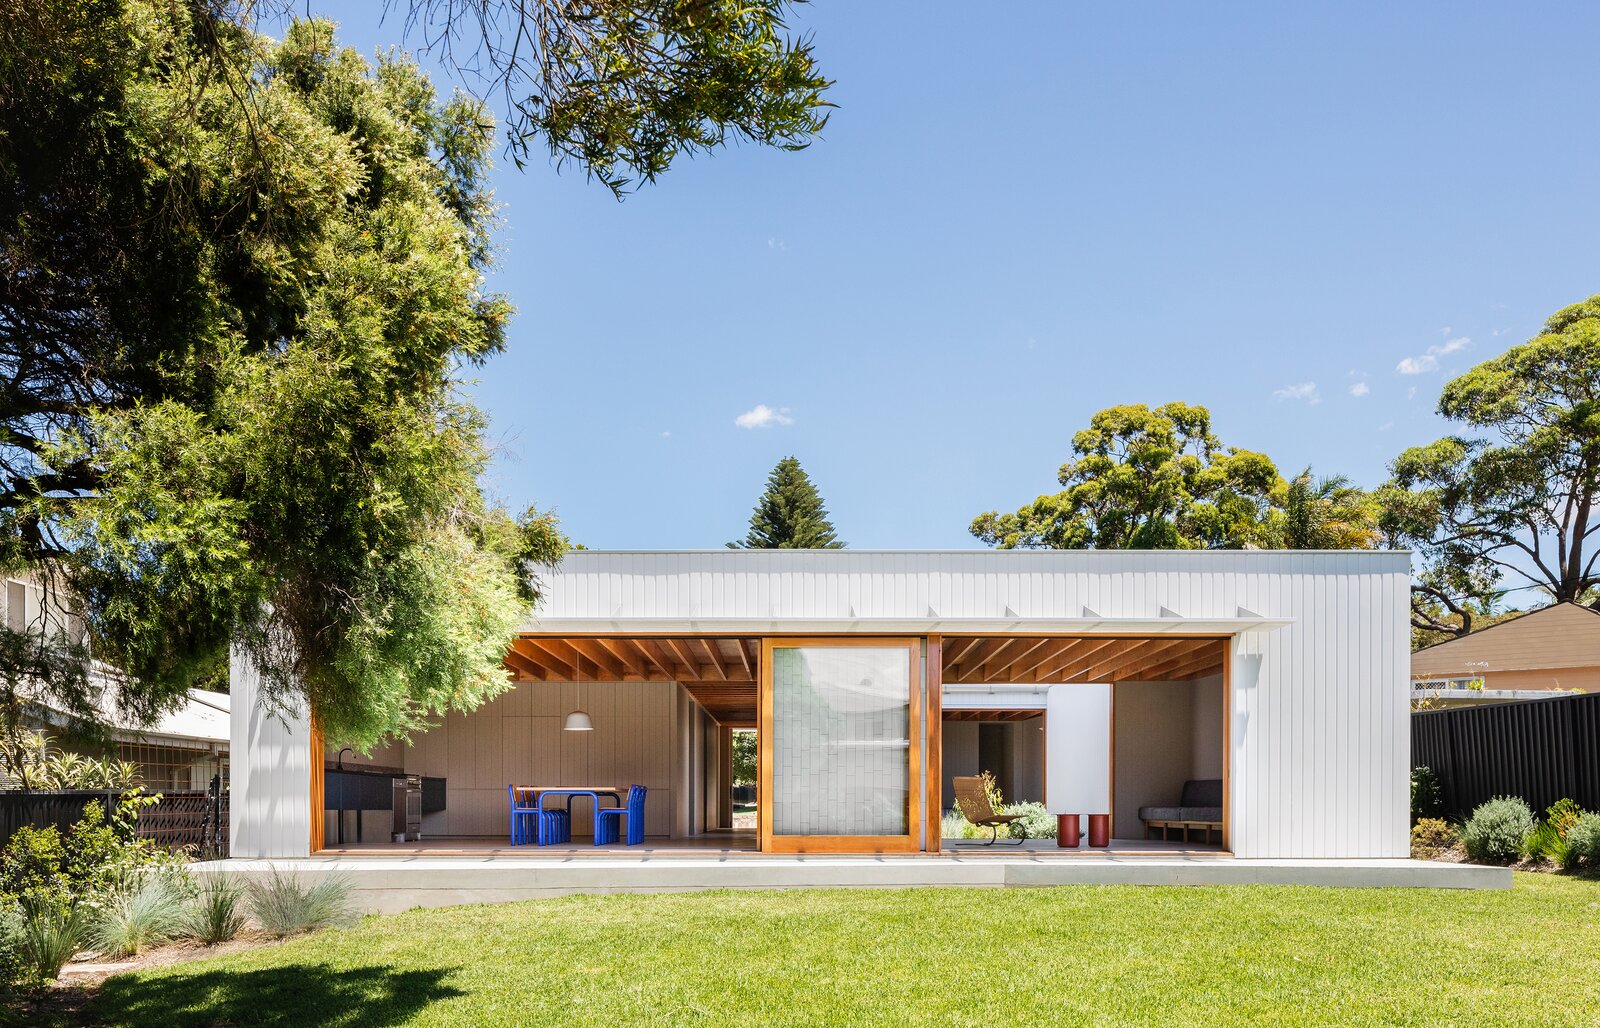 This Energy-Efficient Prefab Is One Family’s Weekend Retreat by the Beach